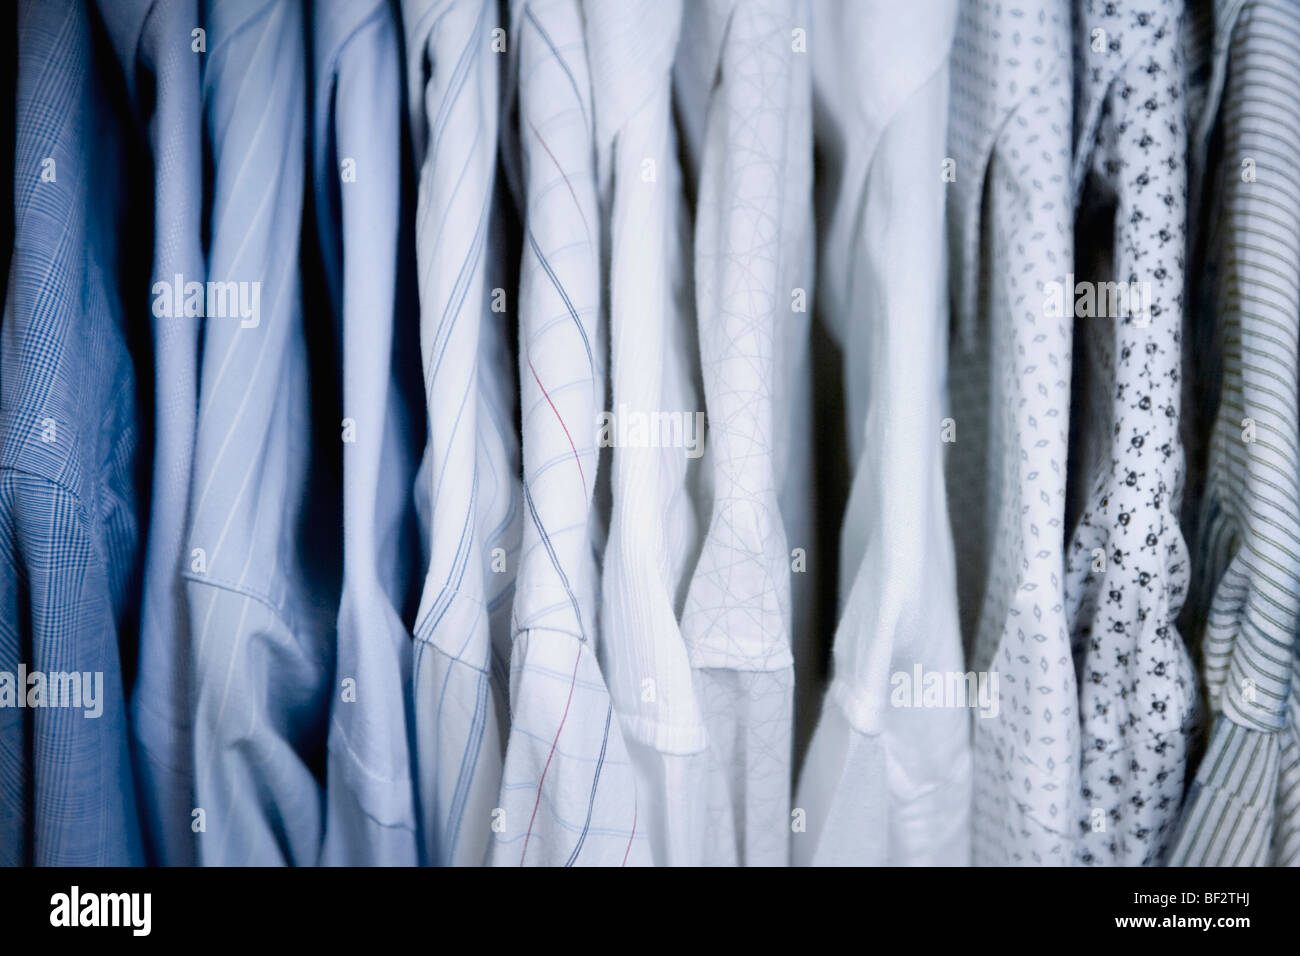 Clothes hanging in a row Stock Photo